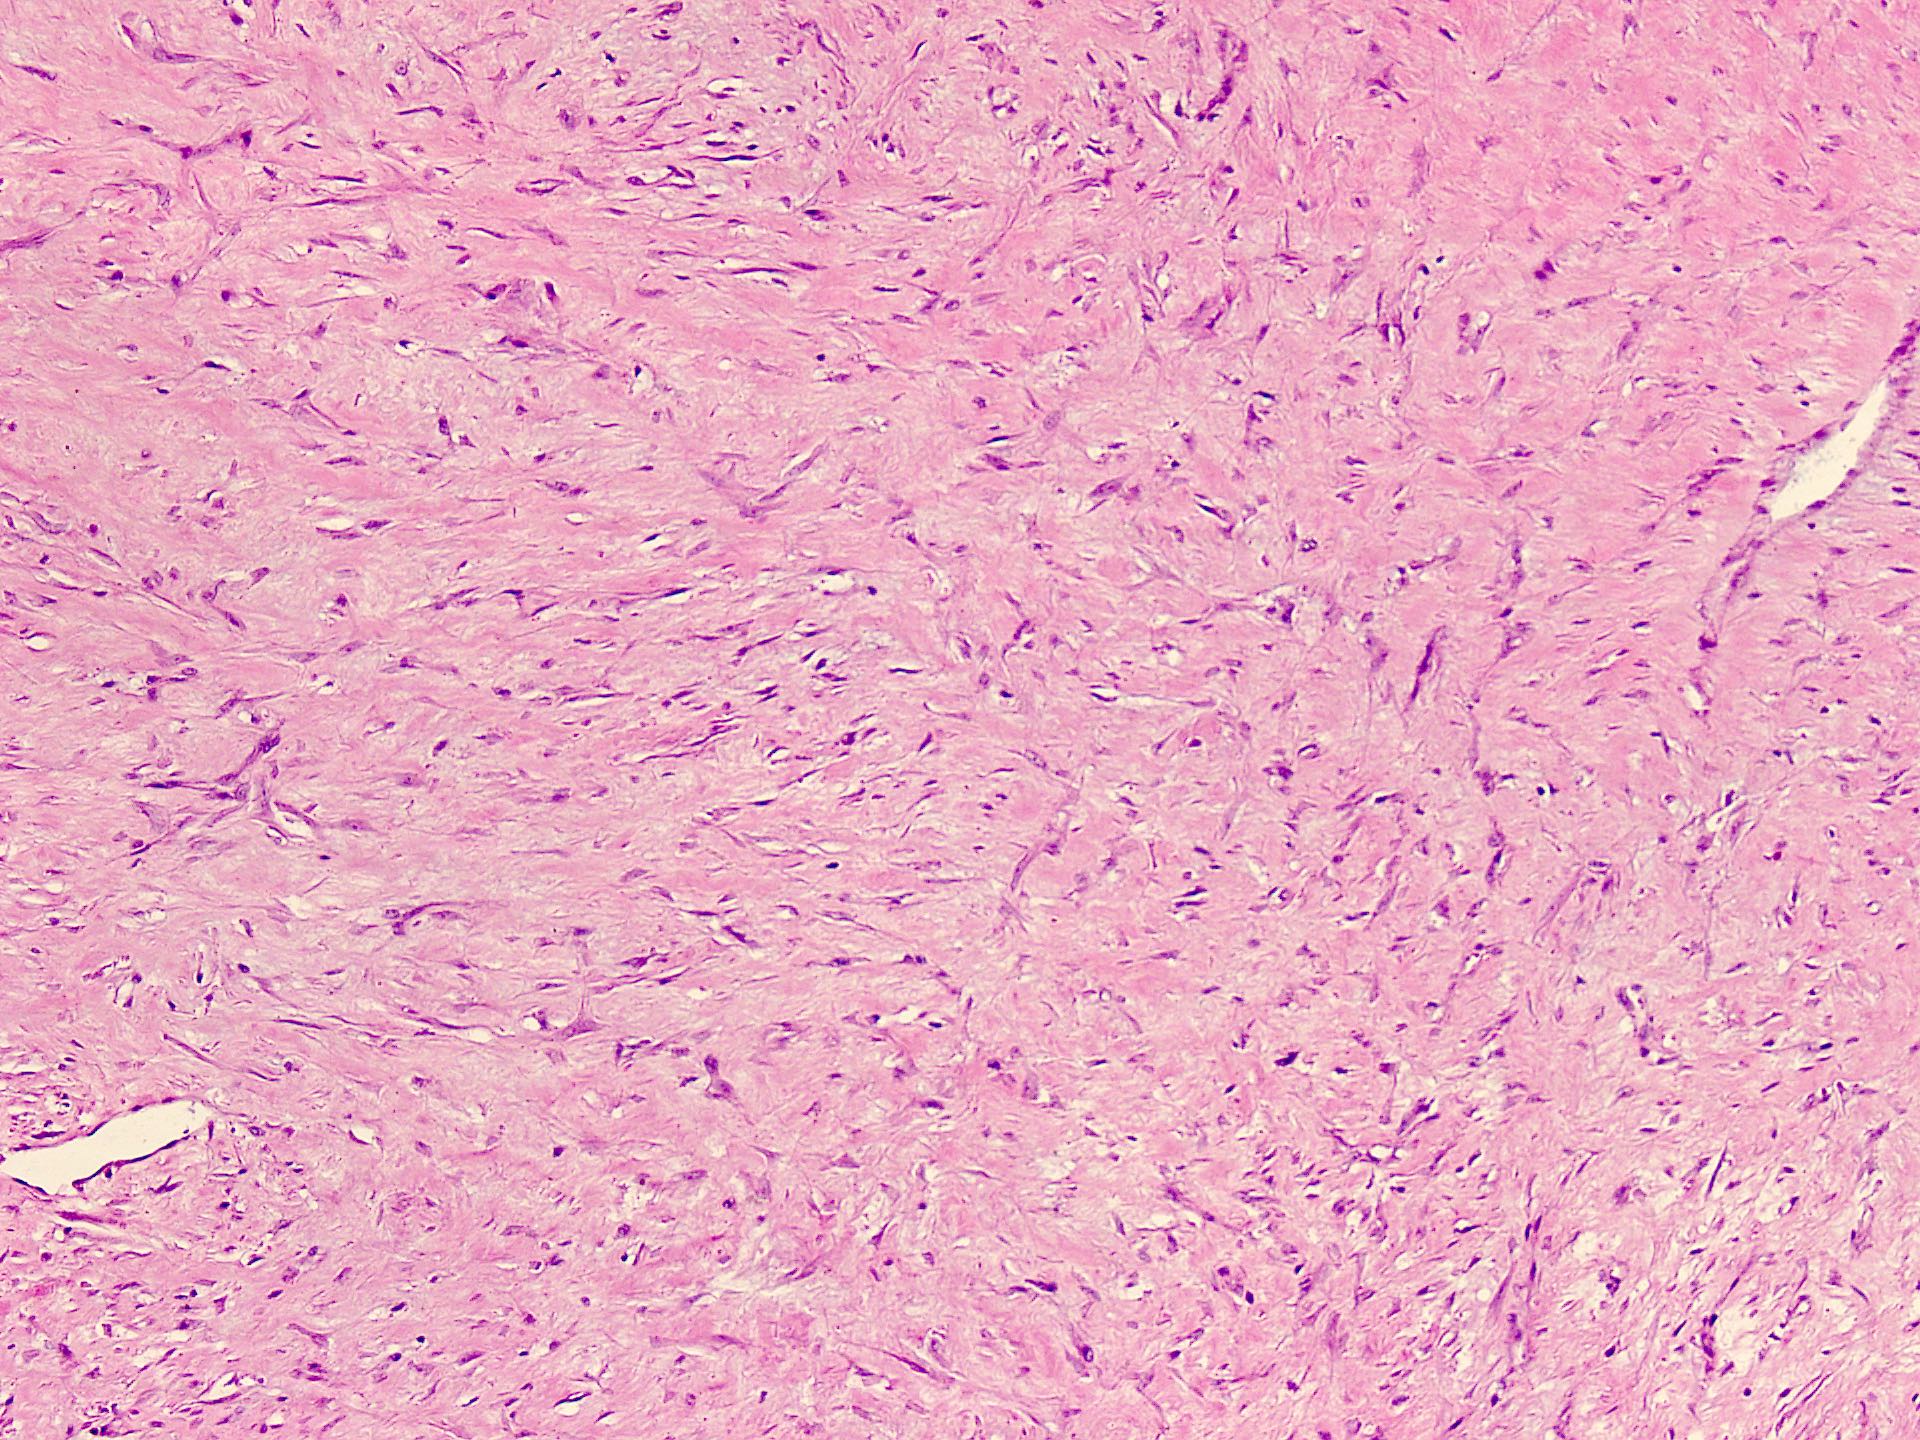 Spindle cell lesion